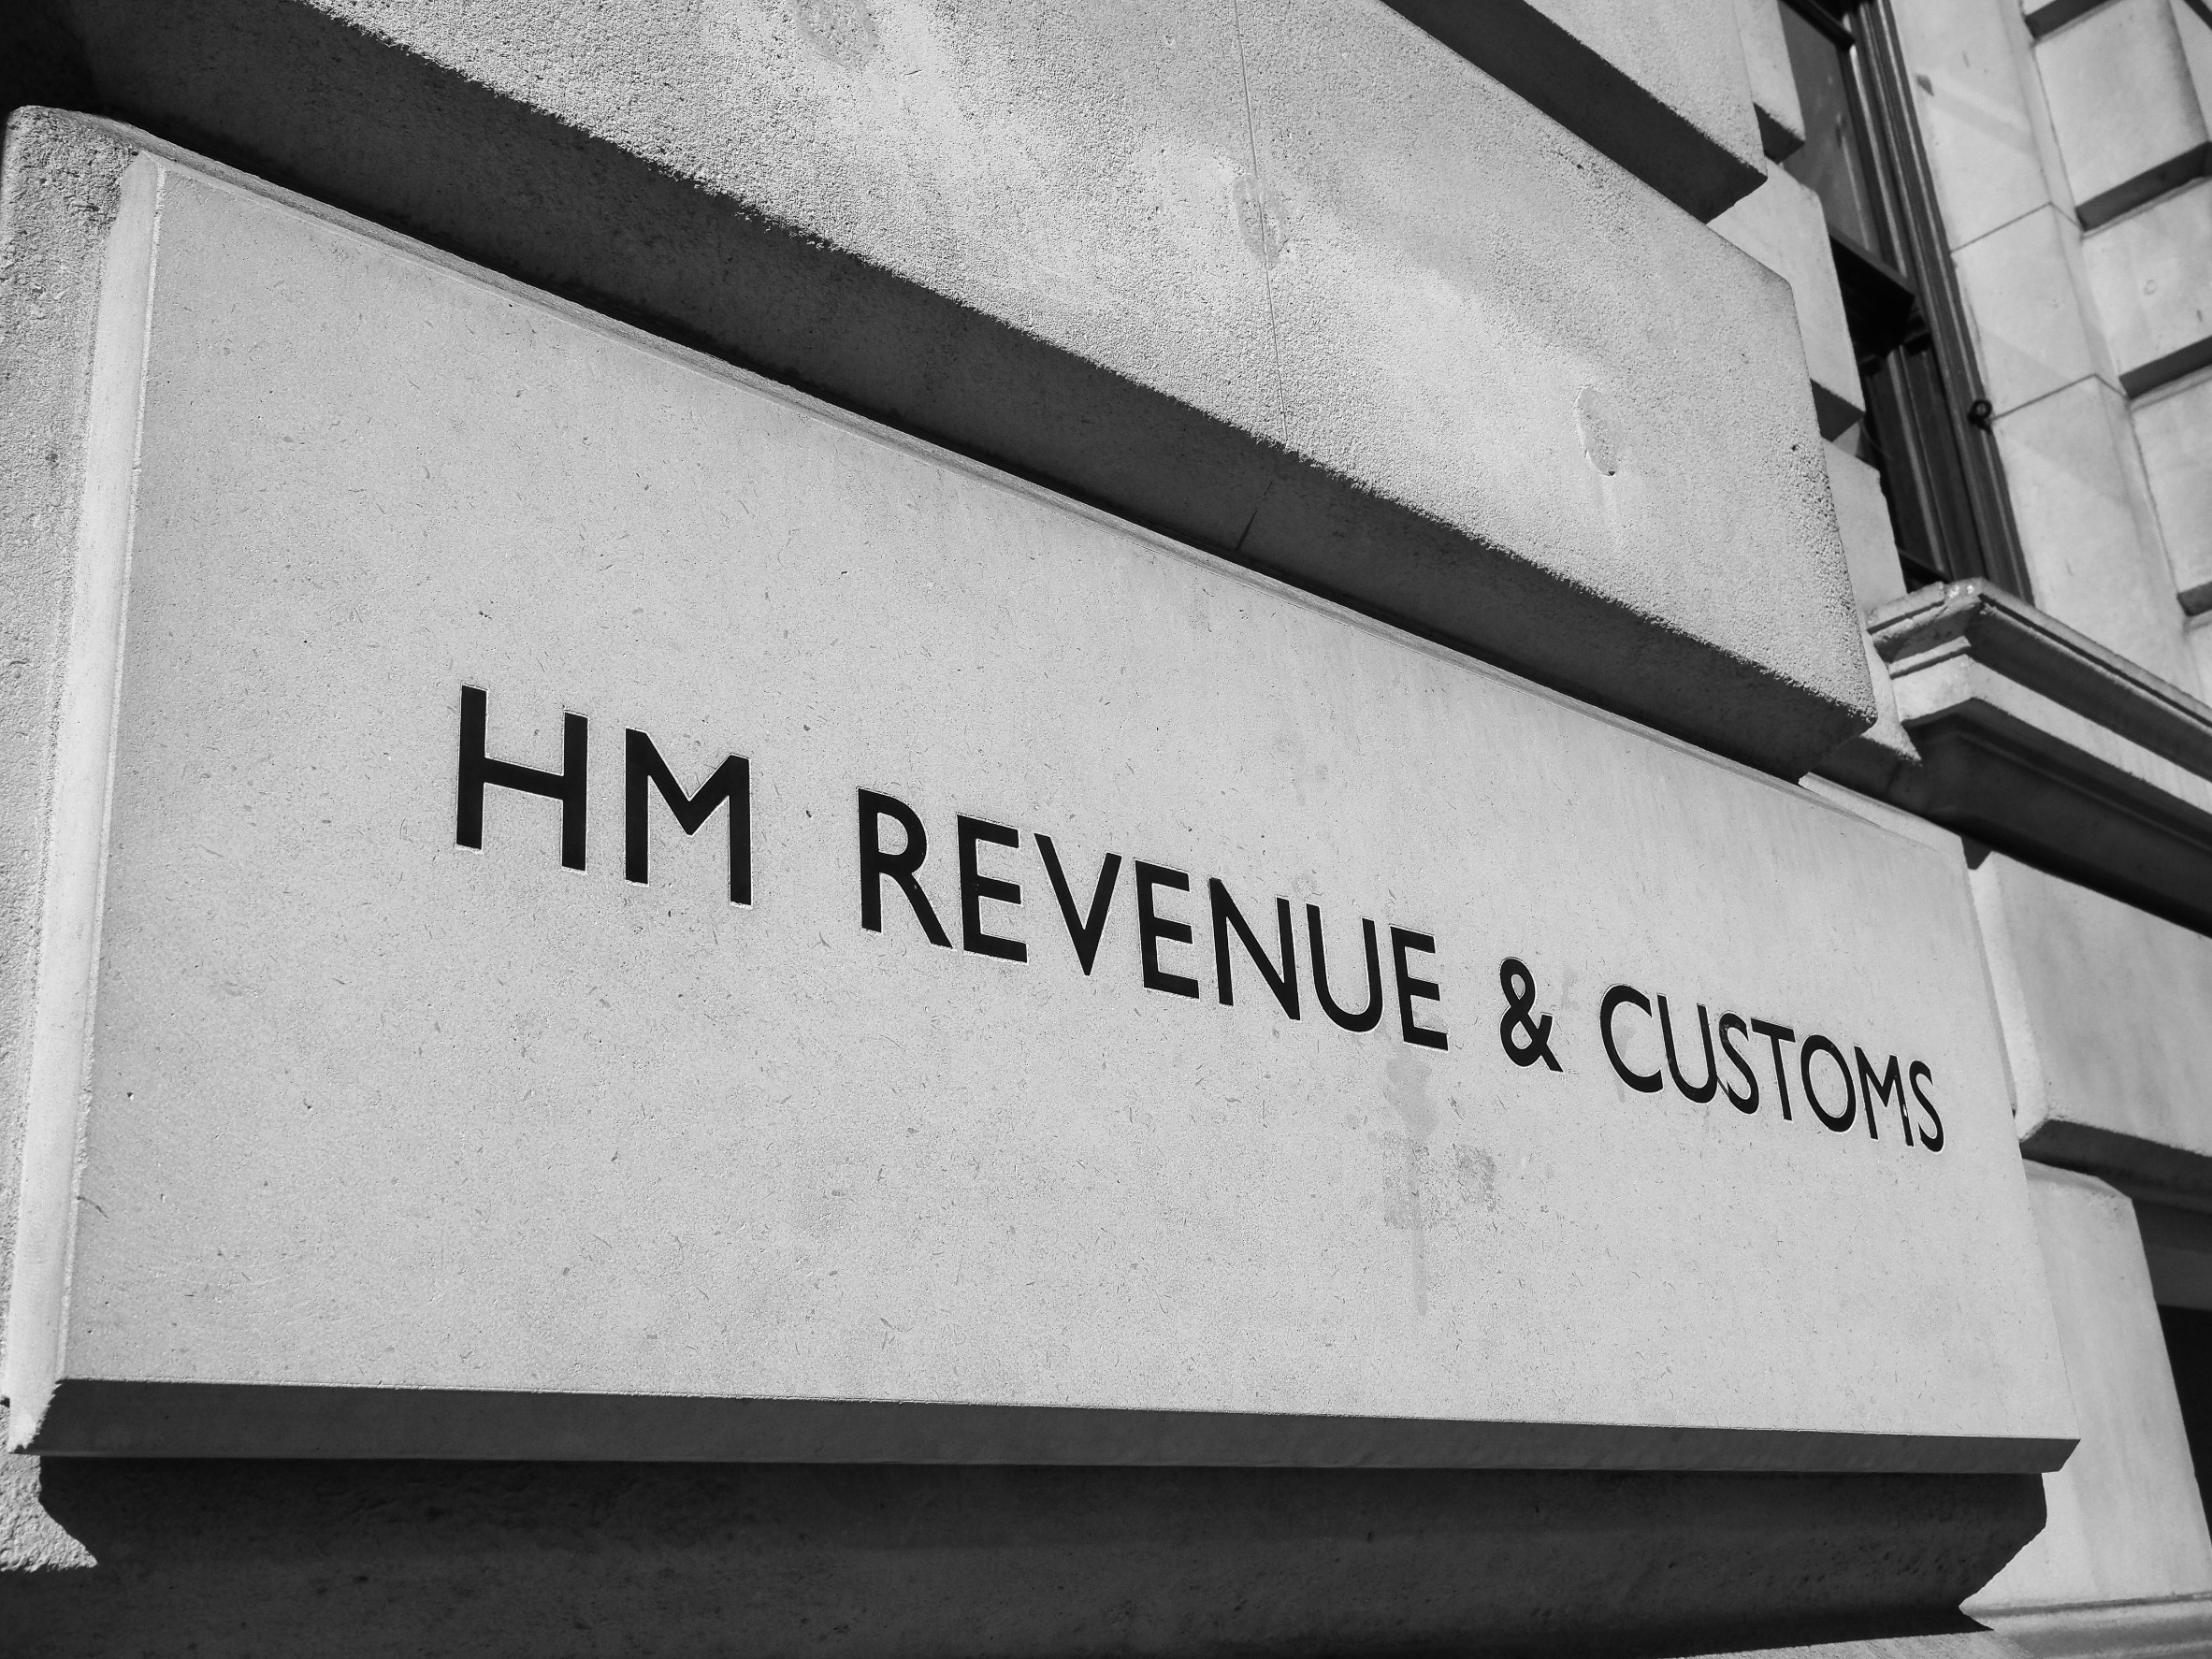 HMRC's Beneficial Loan Interest Rate for Directors Increases to 2.25% in 2023/24